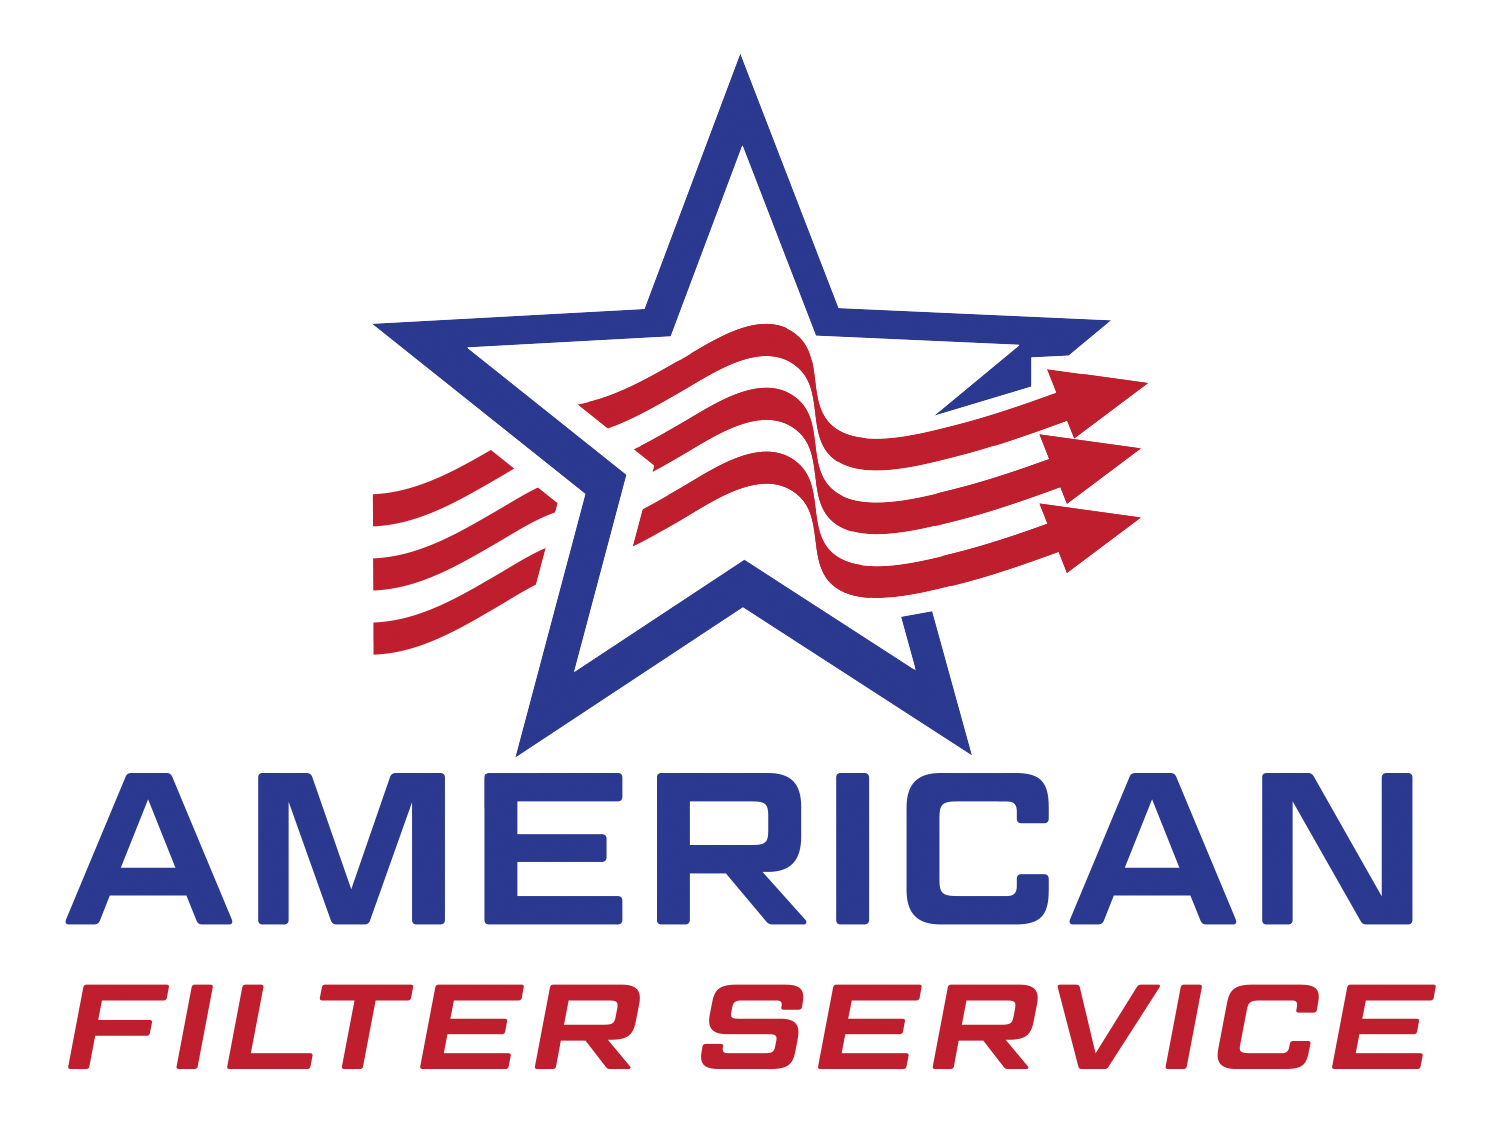 Local Filter Replacement Company & Filter Replacement Services